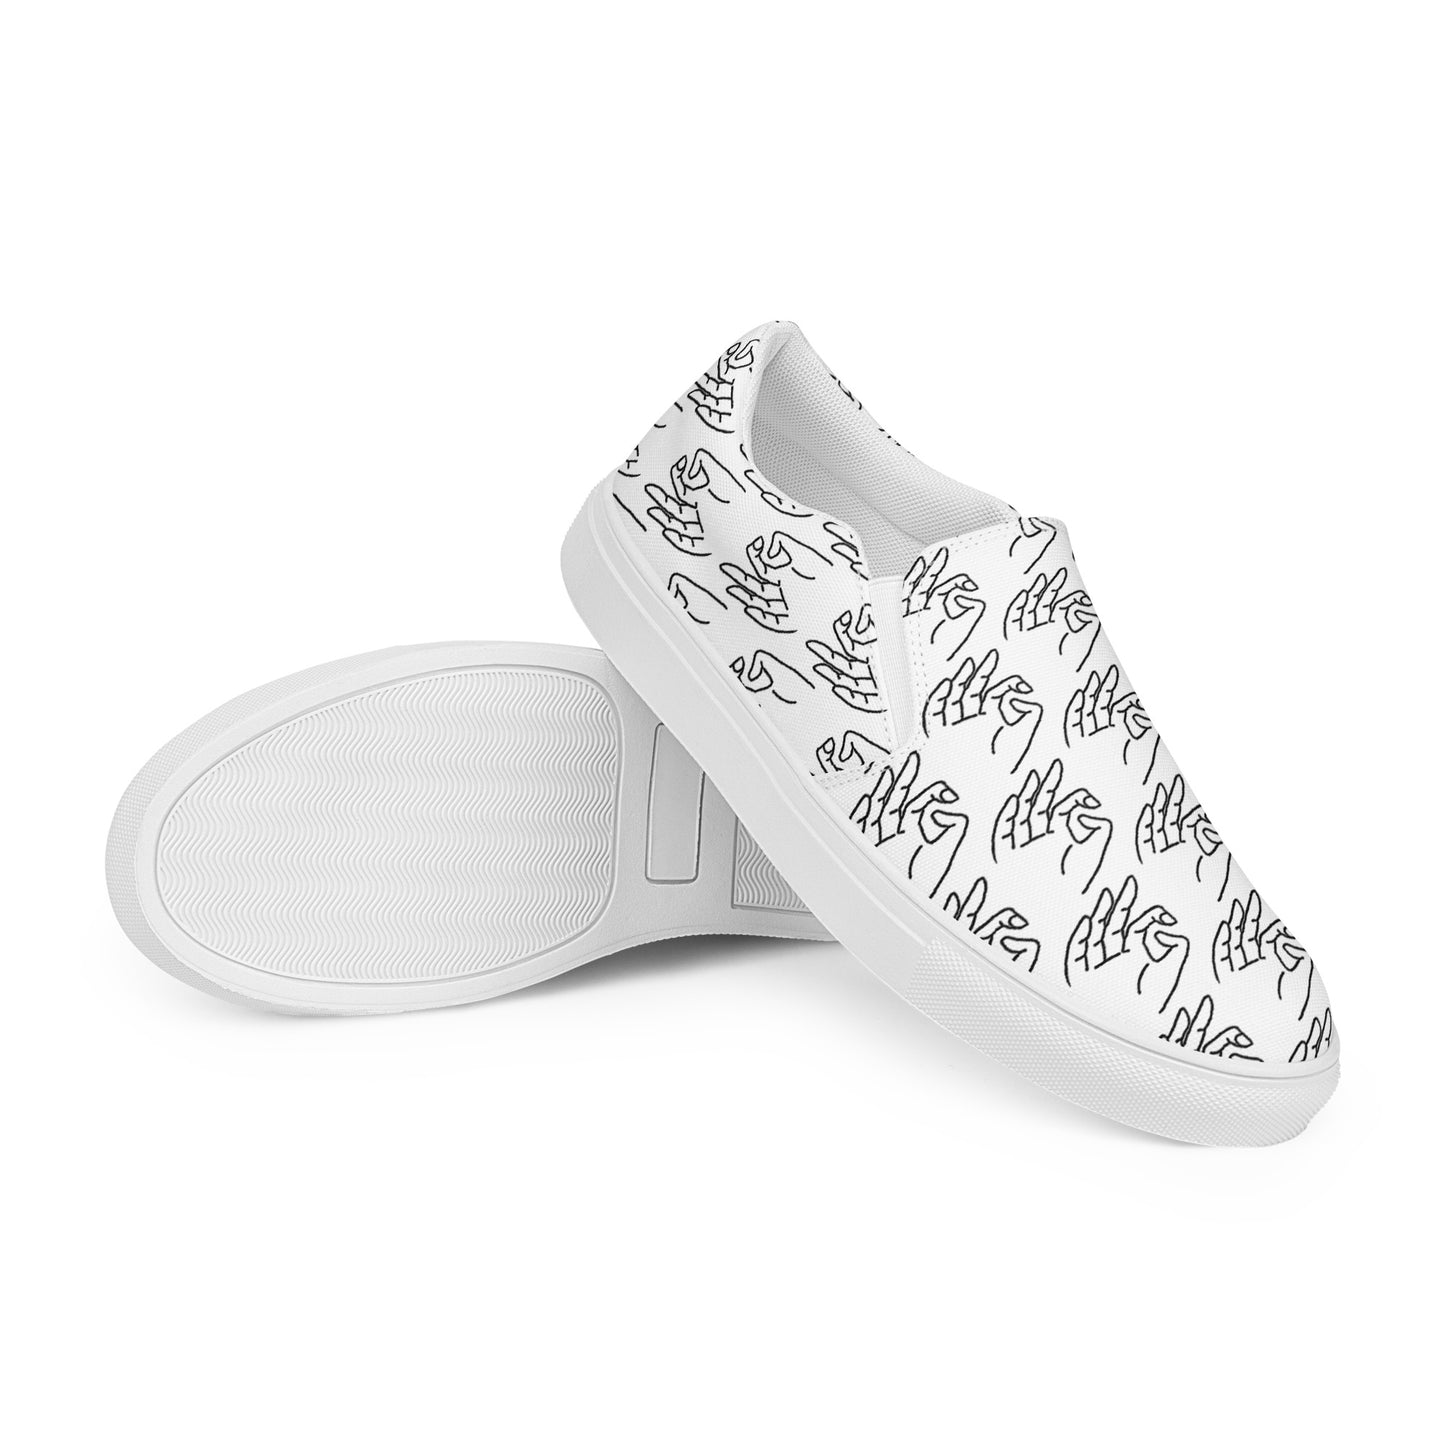 G Slip-on Canvas Shoes